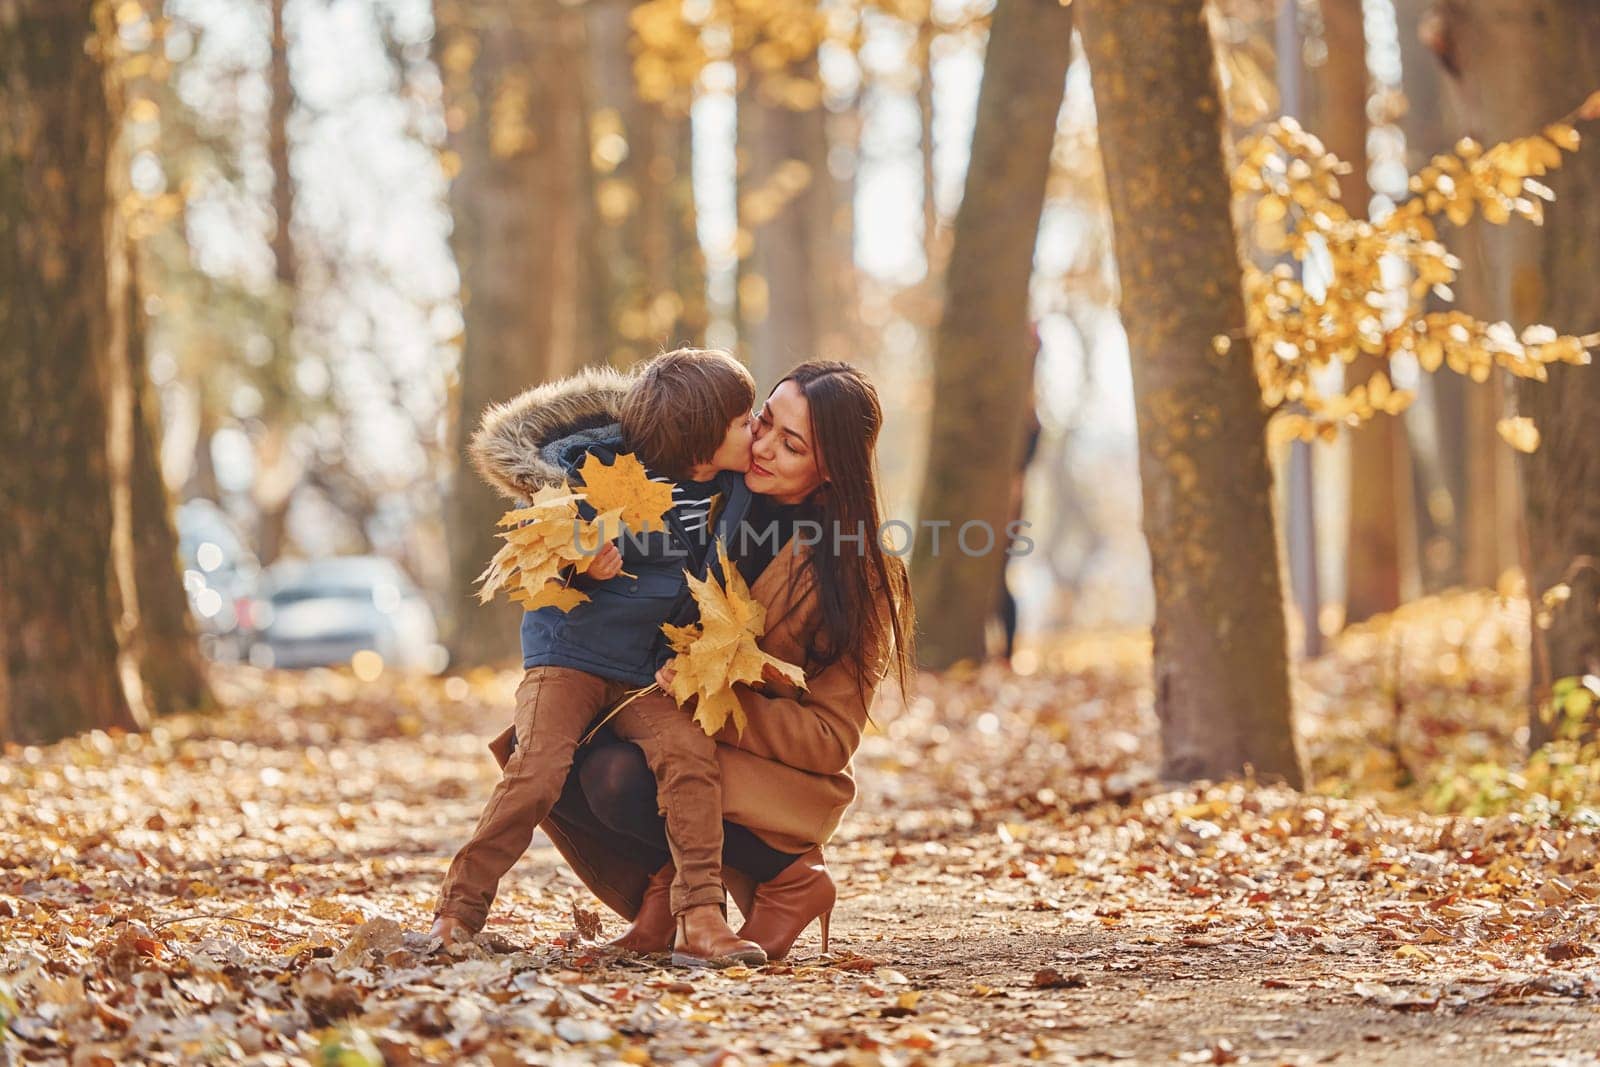 Playing with leaves. Mother with her son is having fun outdoors in the autumn forest by Standret